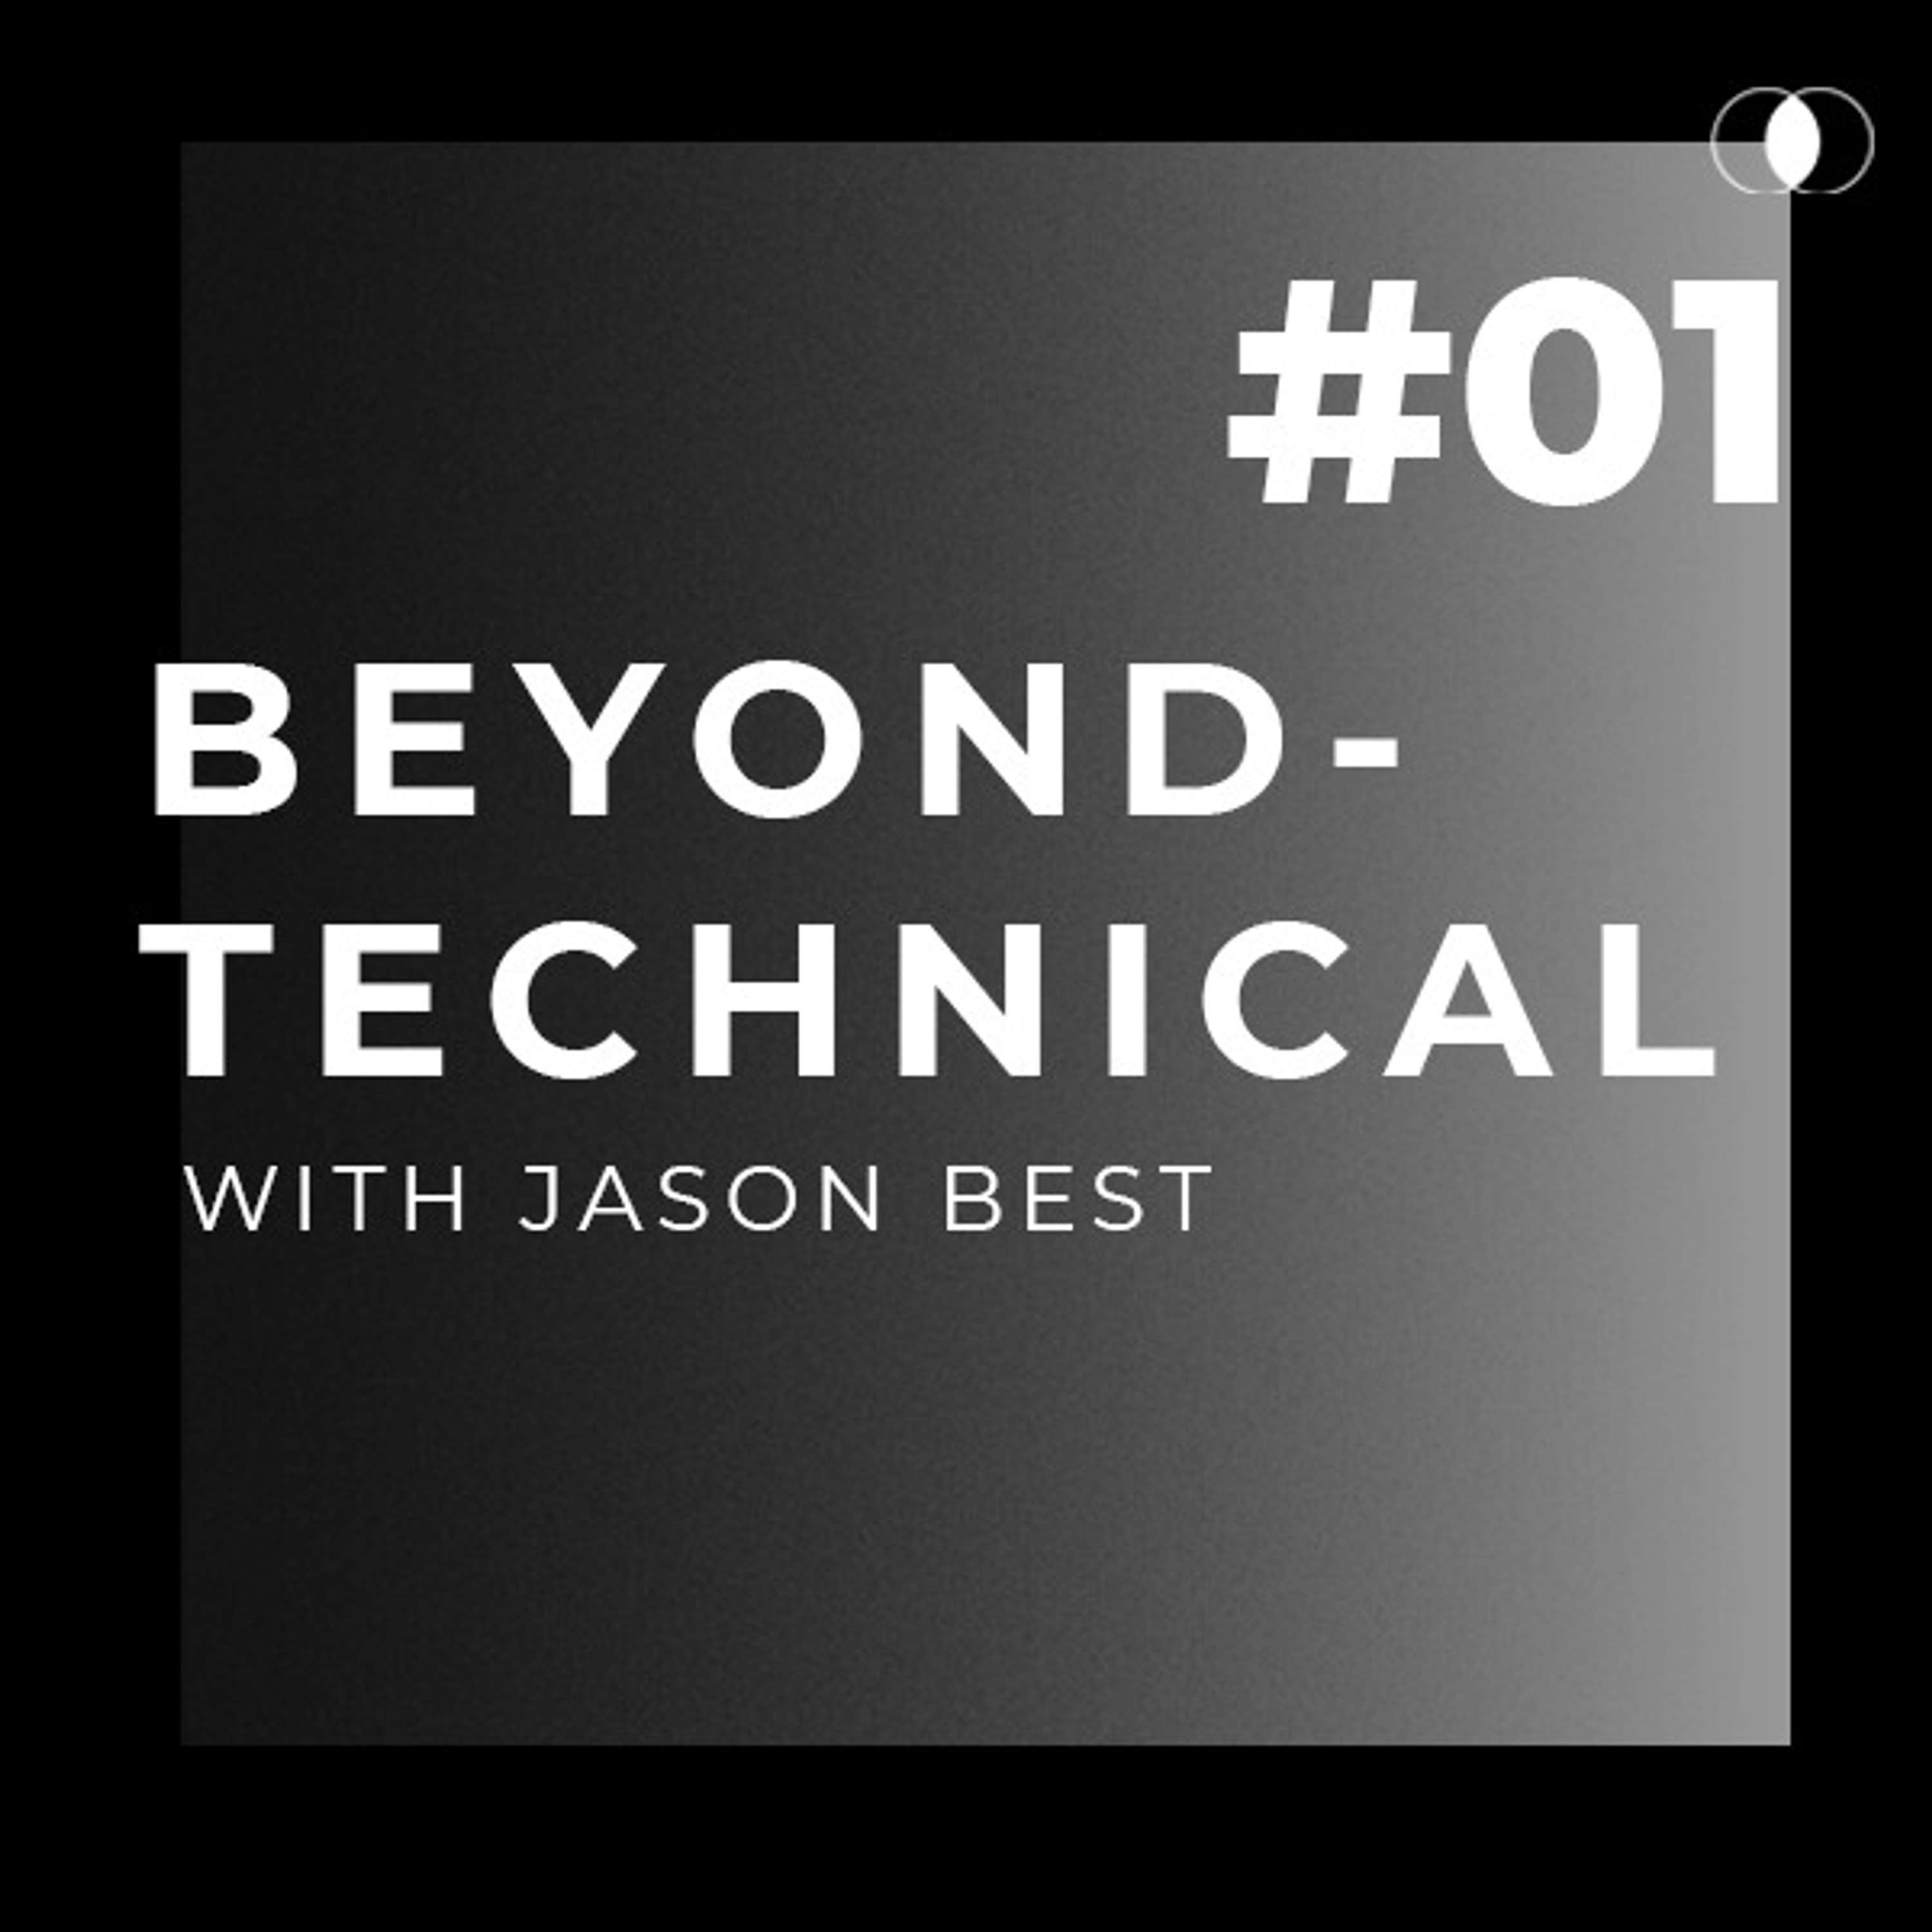 New opportunities for startups with equity crowdfunding | EP#01 - Beyond Technical with Jason Best and Daniel Weinmann